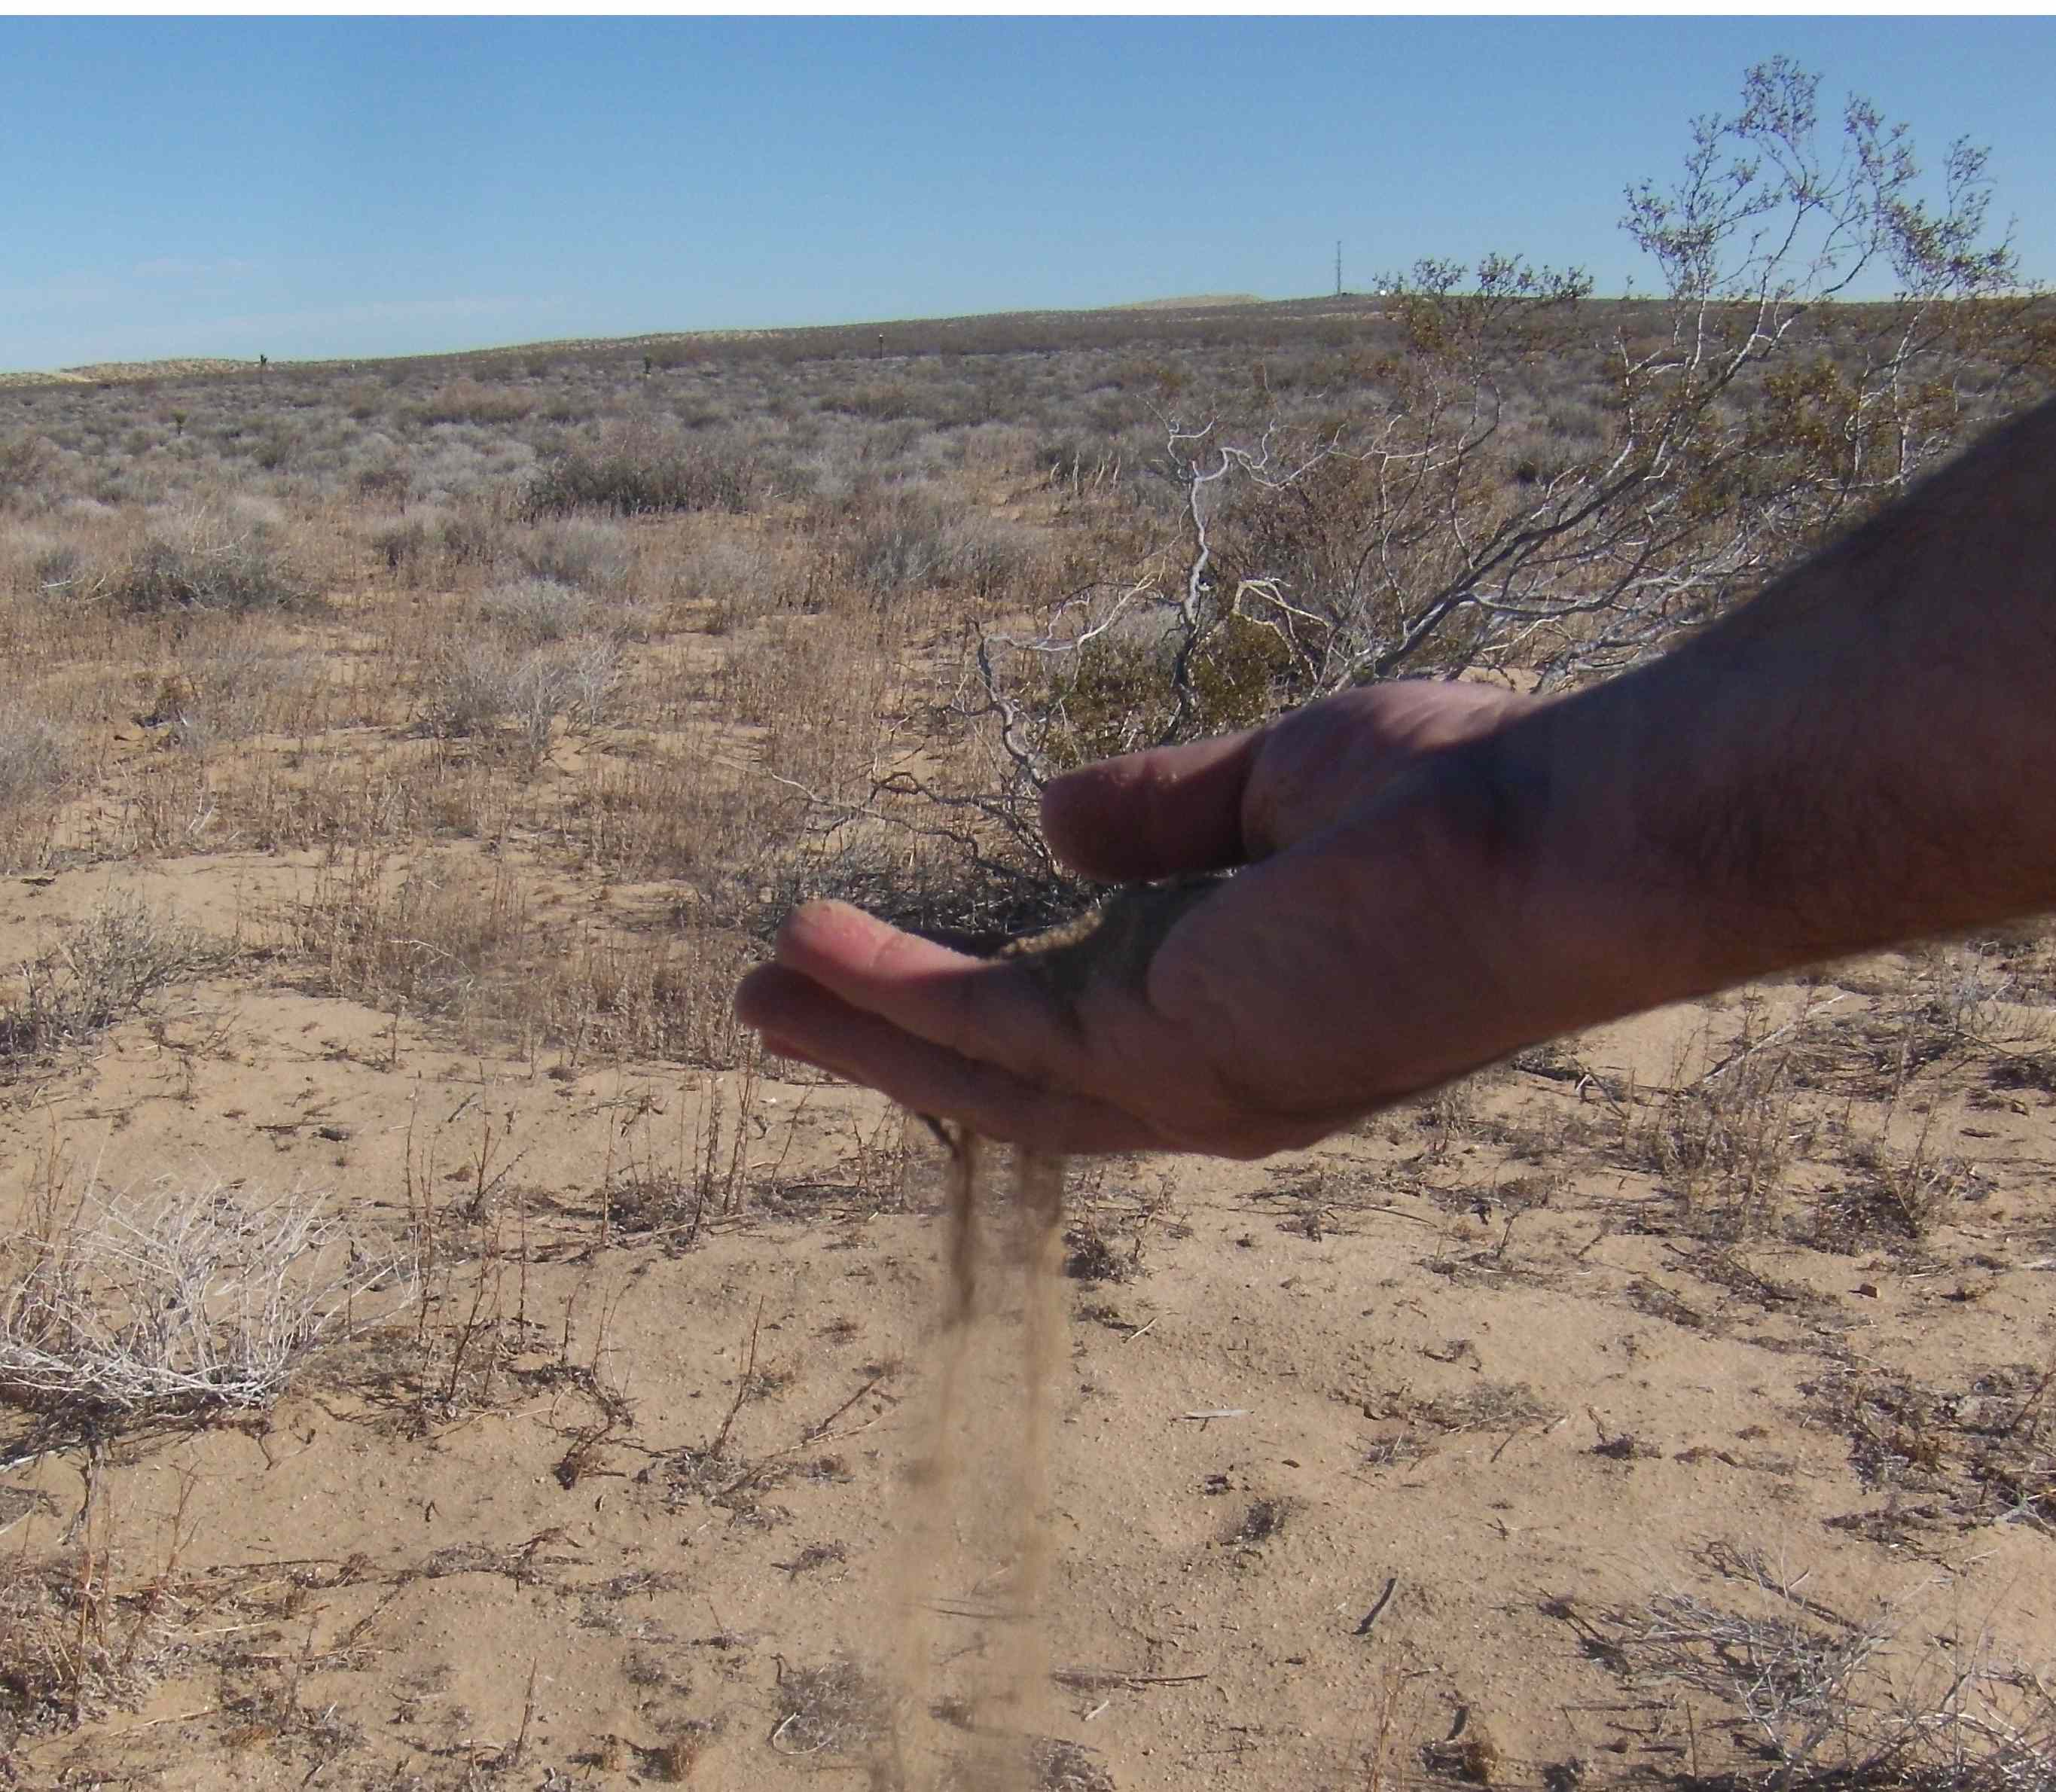 Sand falling out of hand in the Mojave Desert.